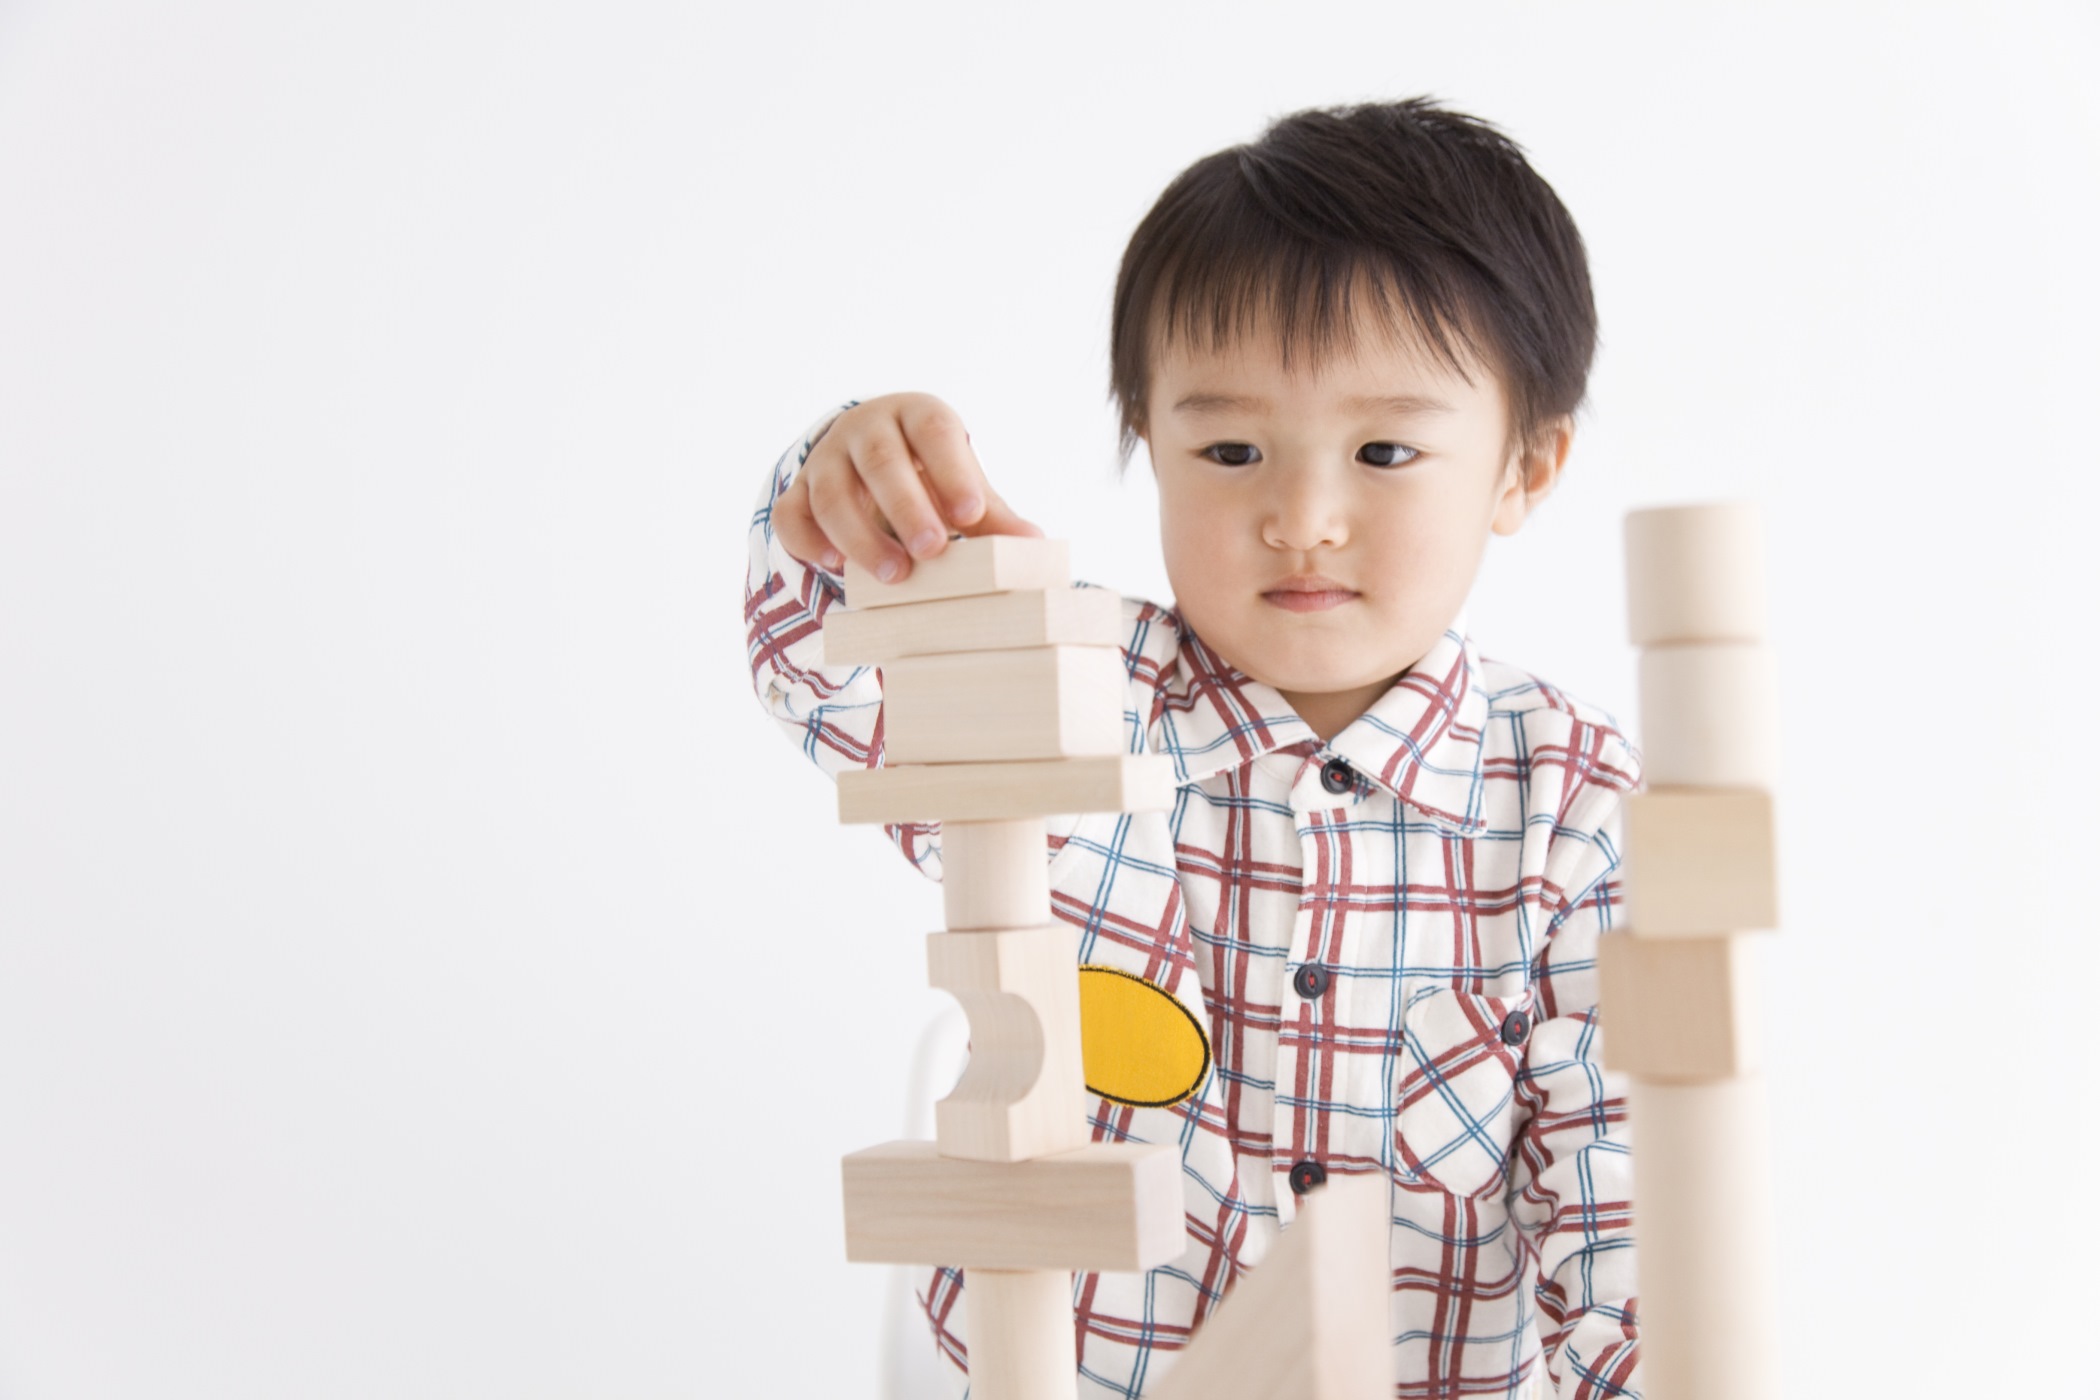 A young boy is playing with blocks. He is between 2 and 6 or 7 years old